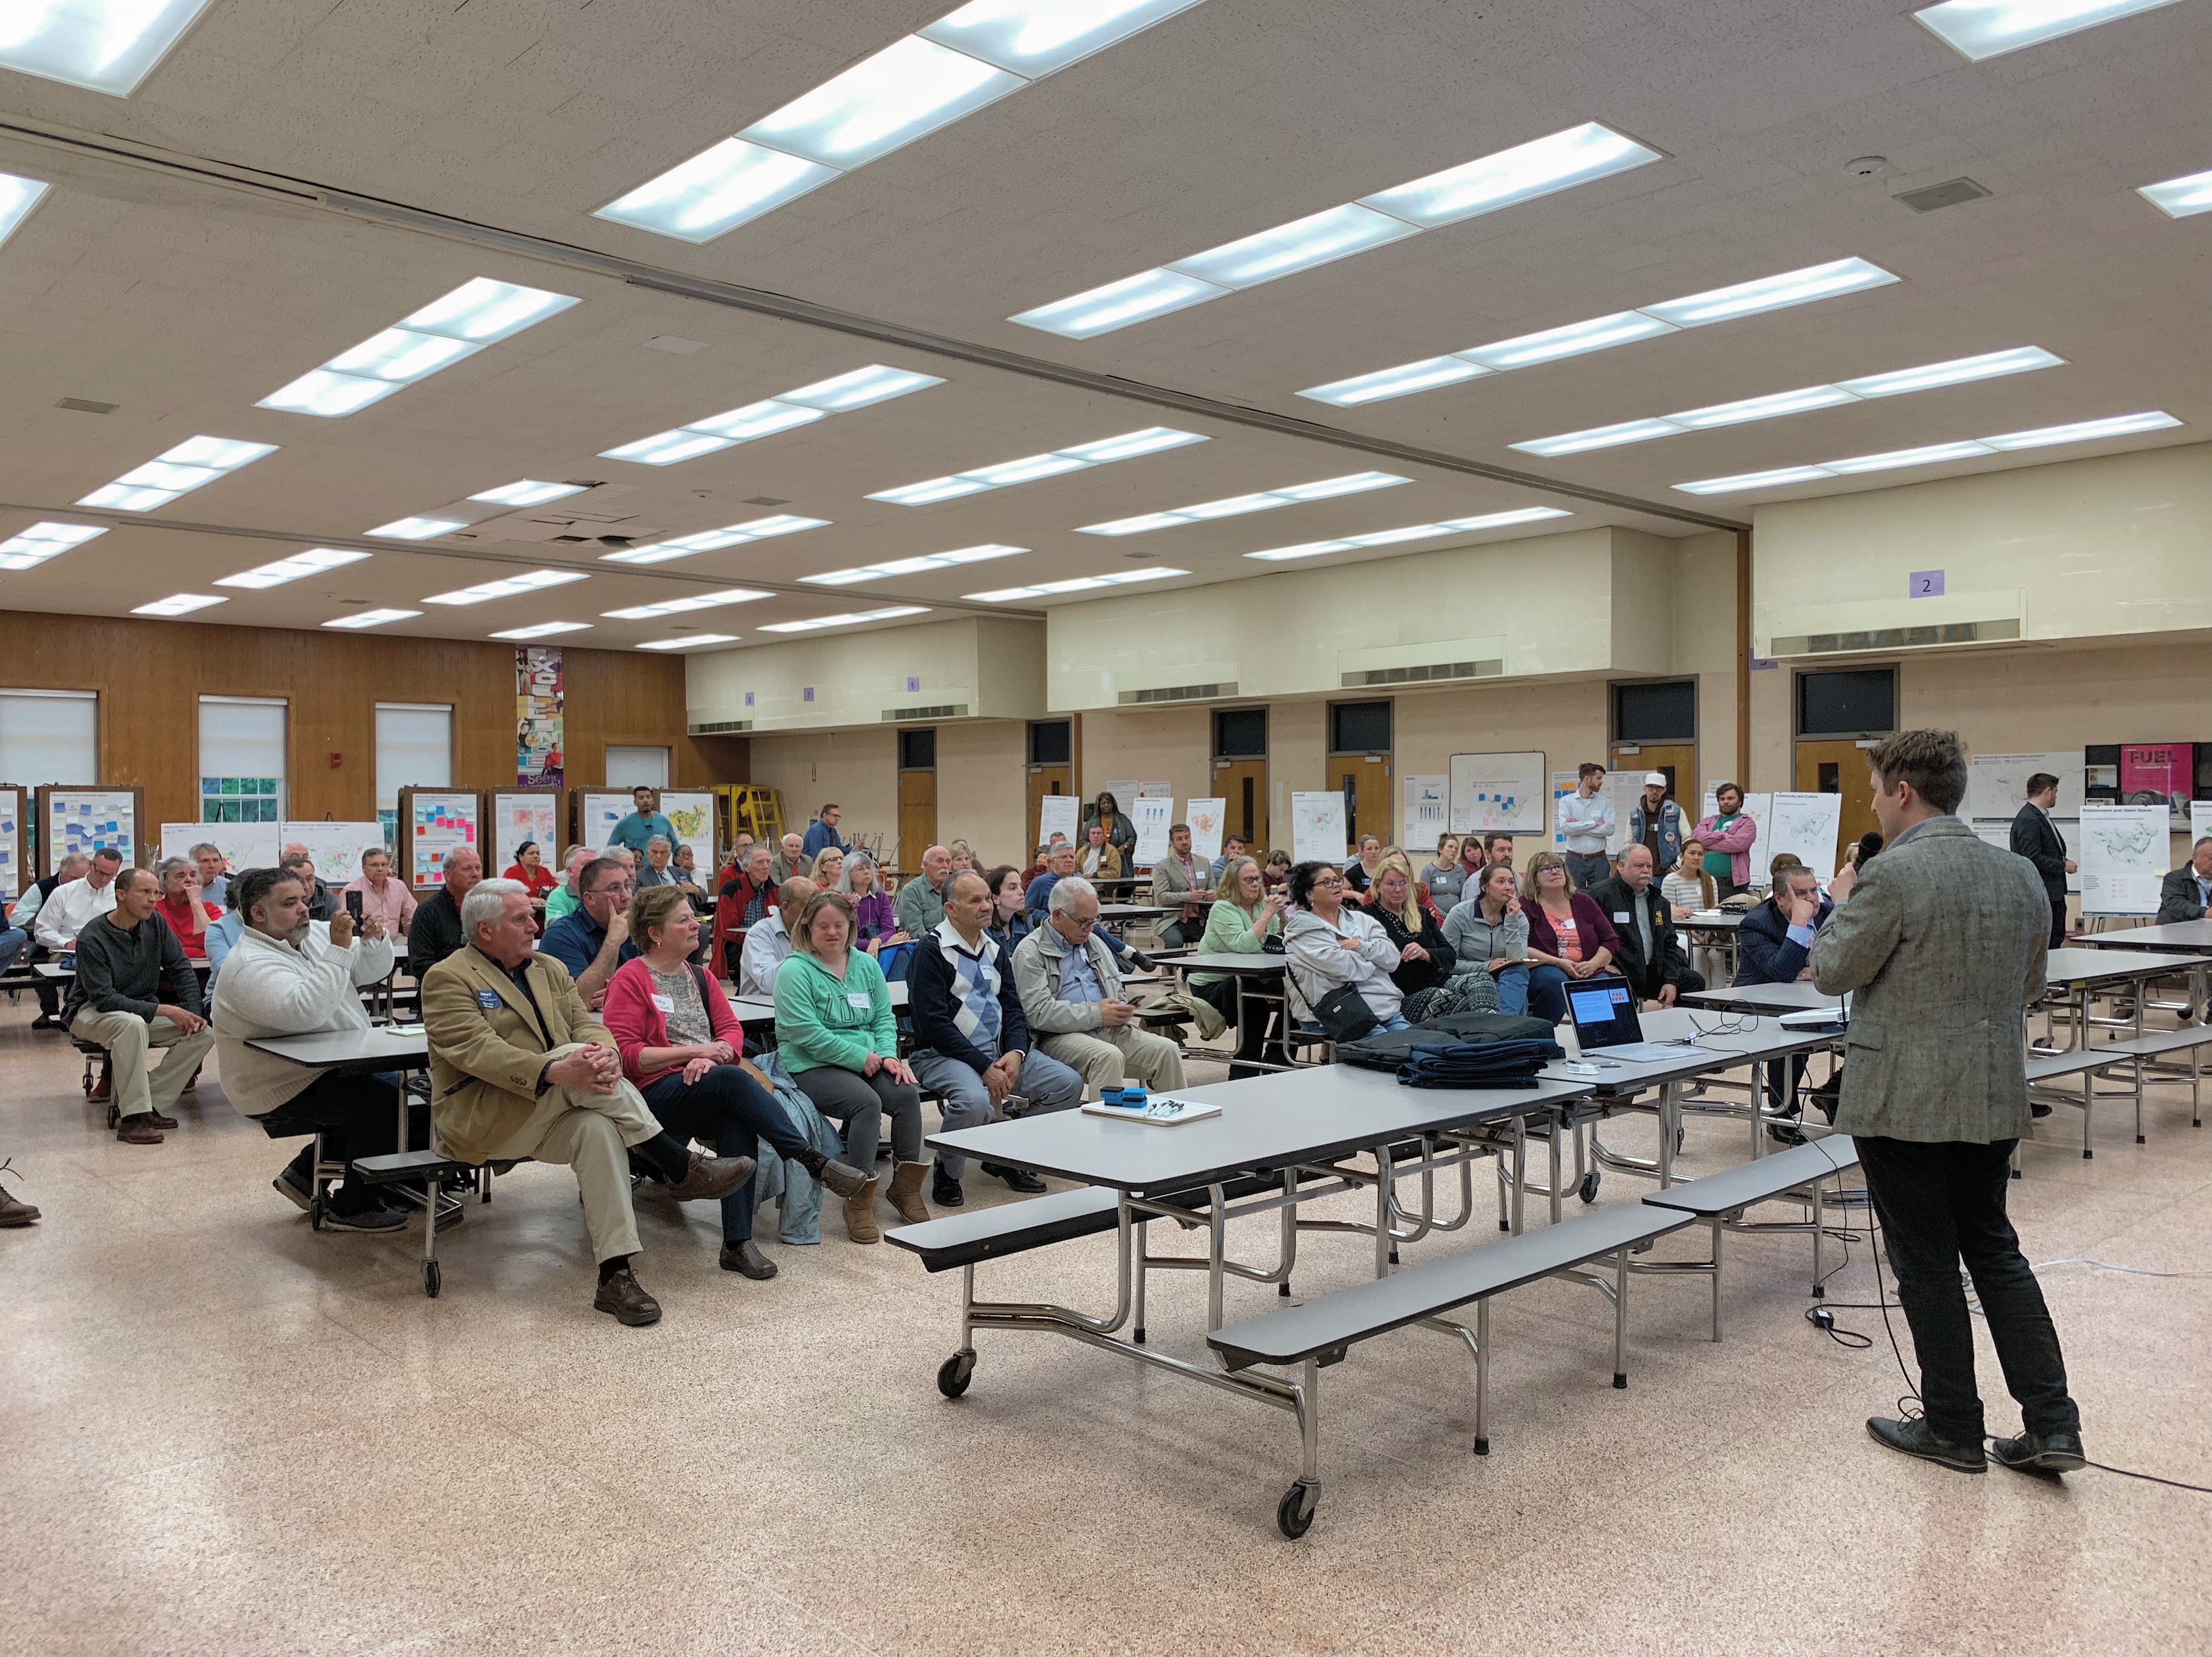 Vision Haverhill 2035 kicks off with community meeting